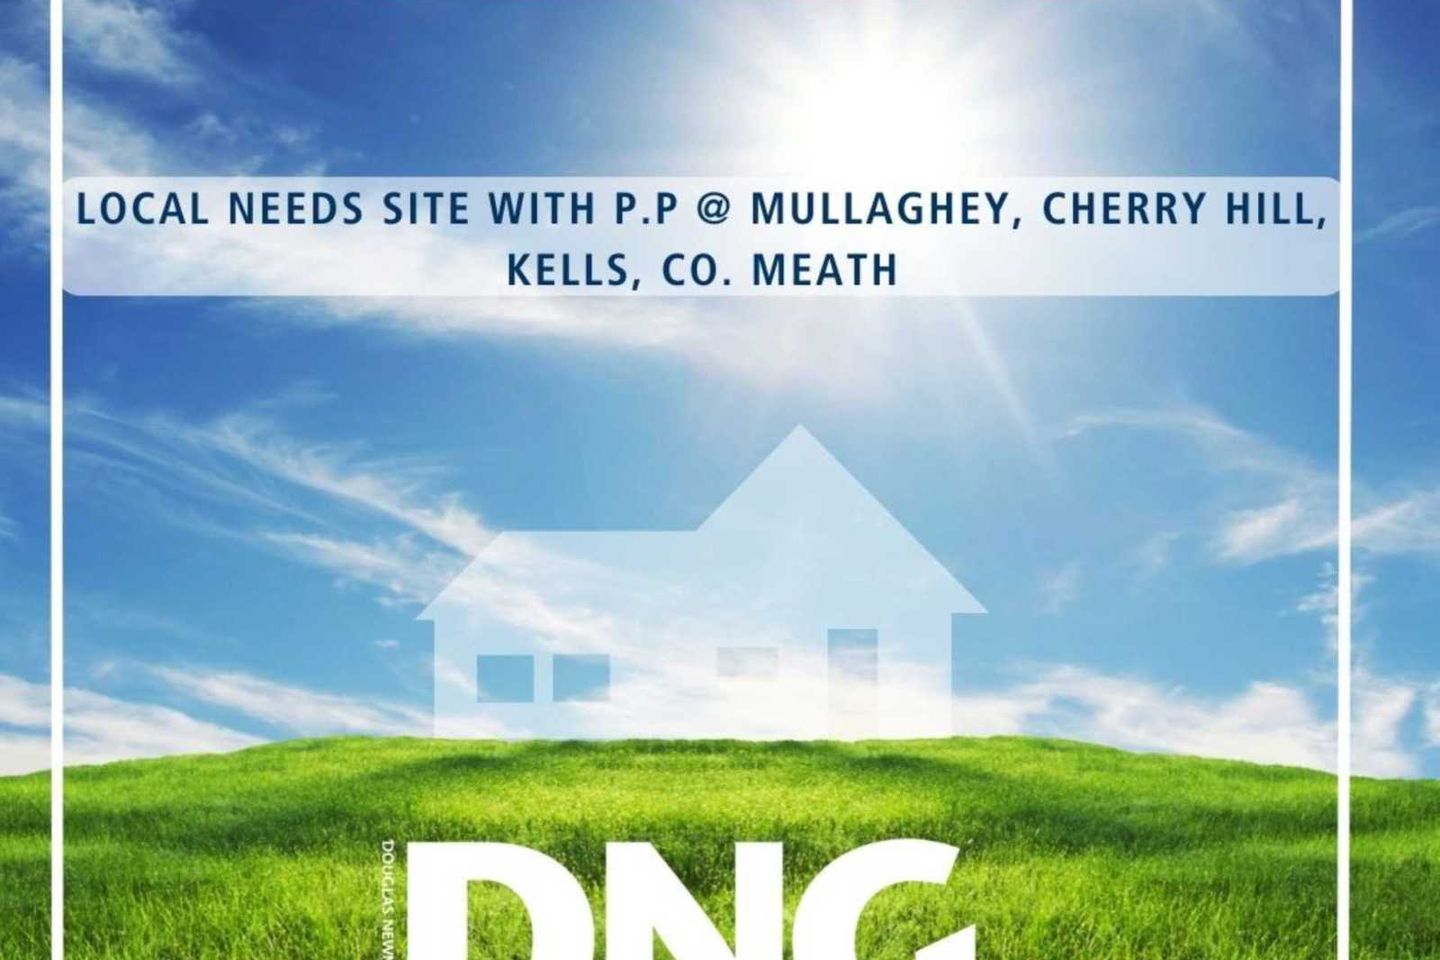 Local Needs Site With P.P At Mullaghey, Cherry Hill, Kells, Co. Meath